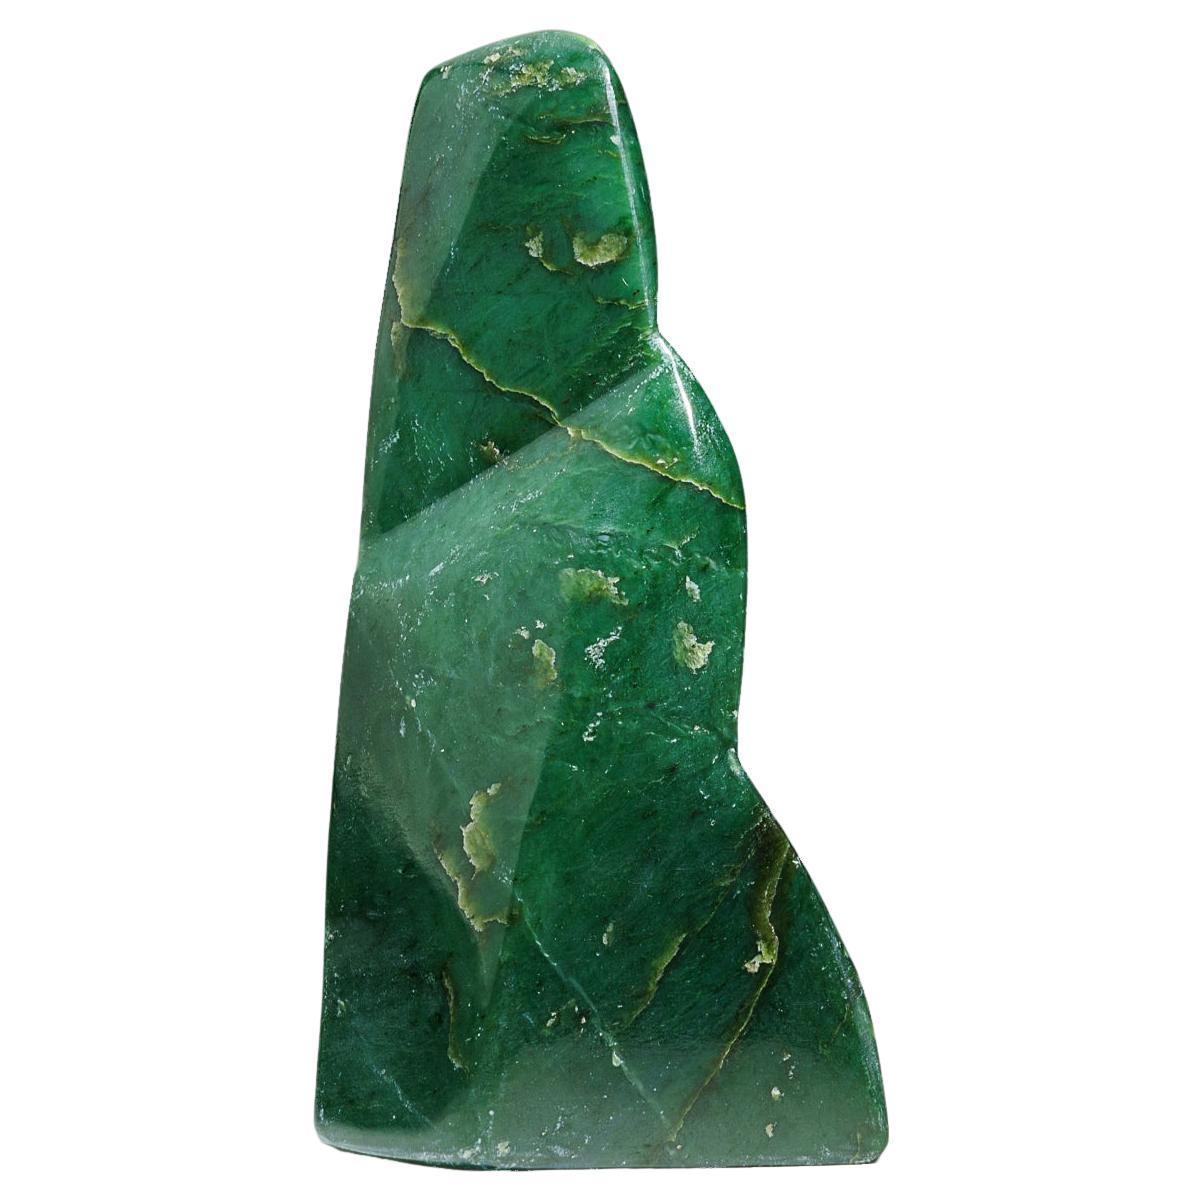 Polished Nephrite Jade Freeform from Pakistan '2.5 lbs' For Sale